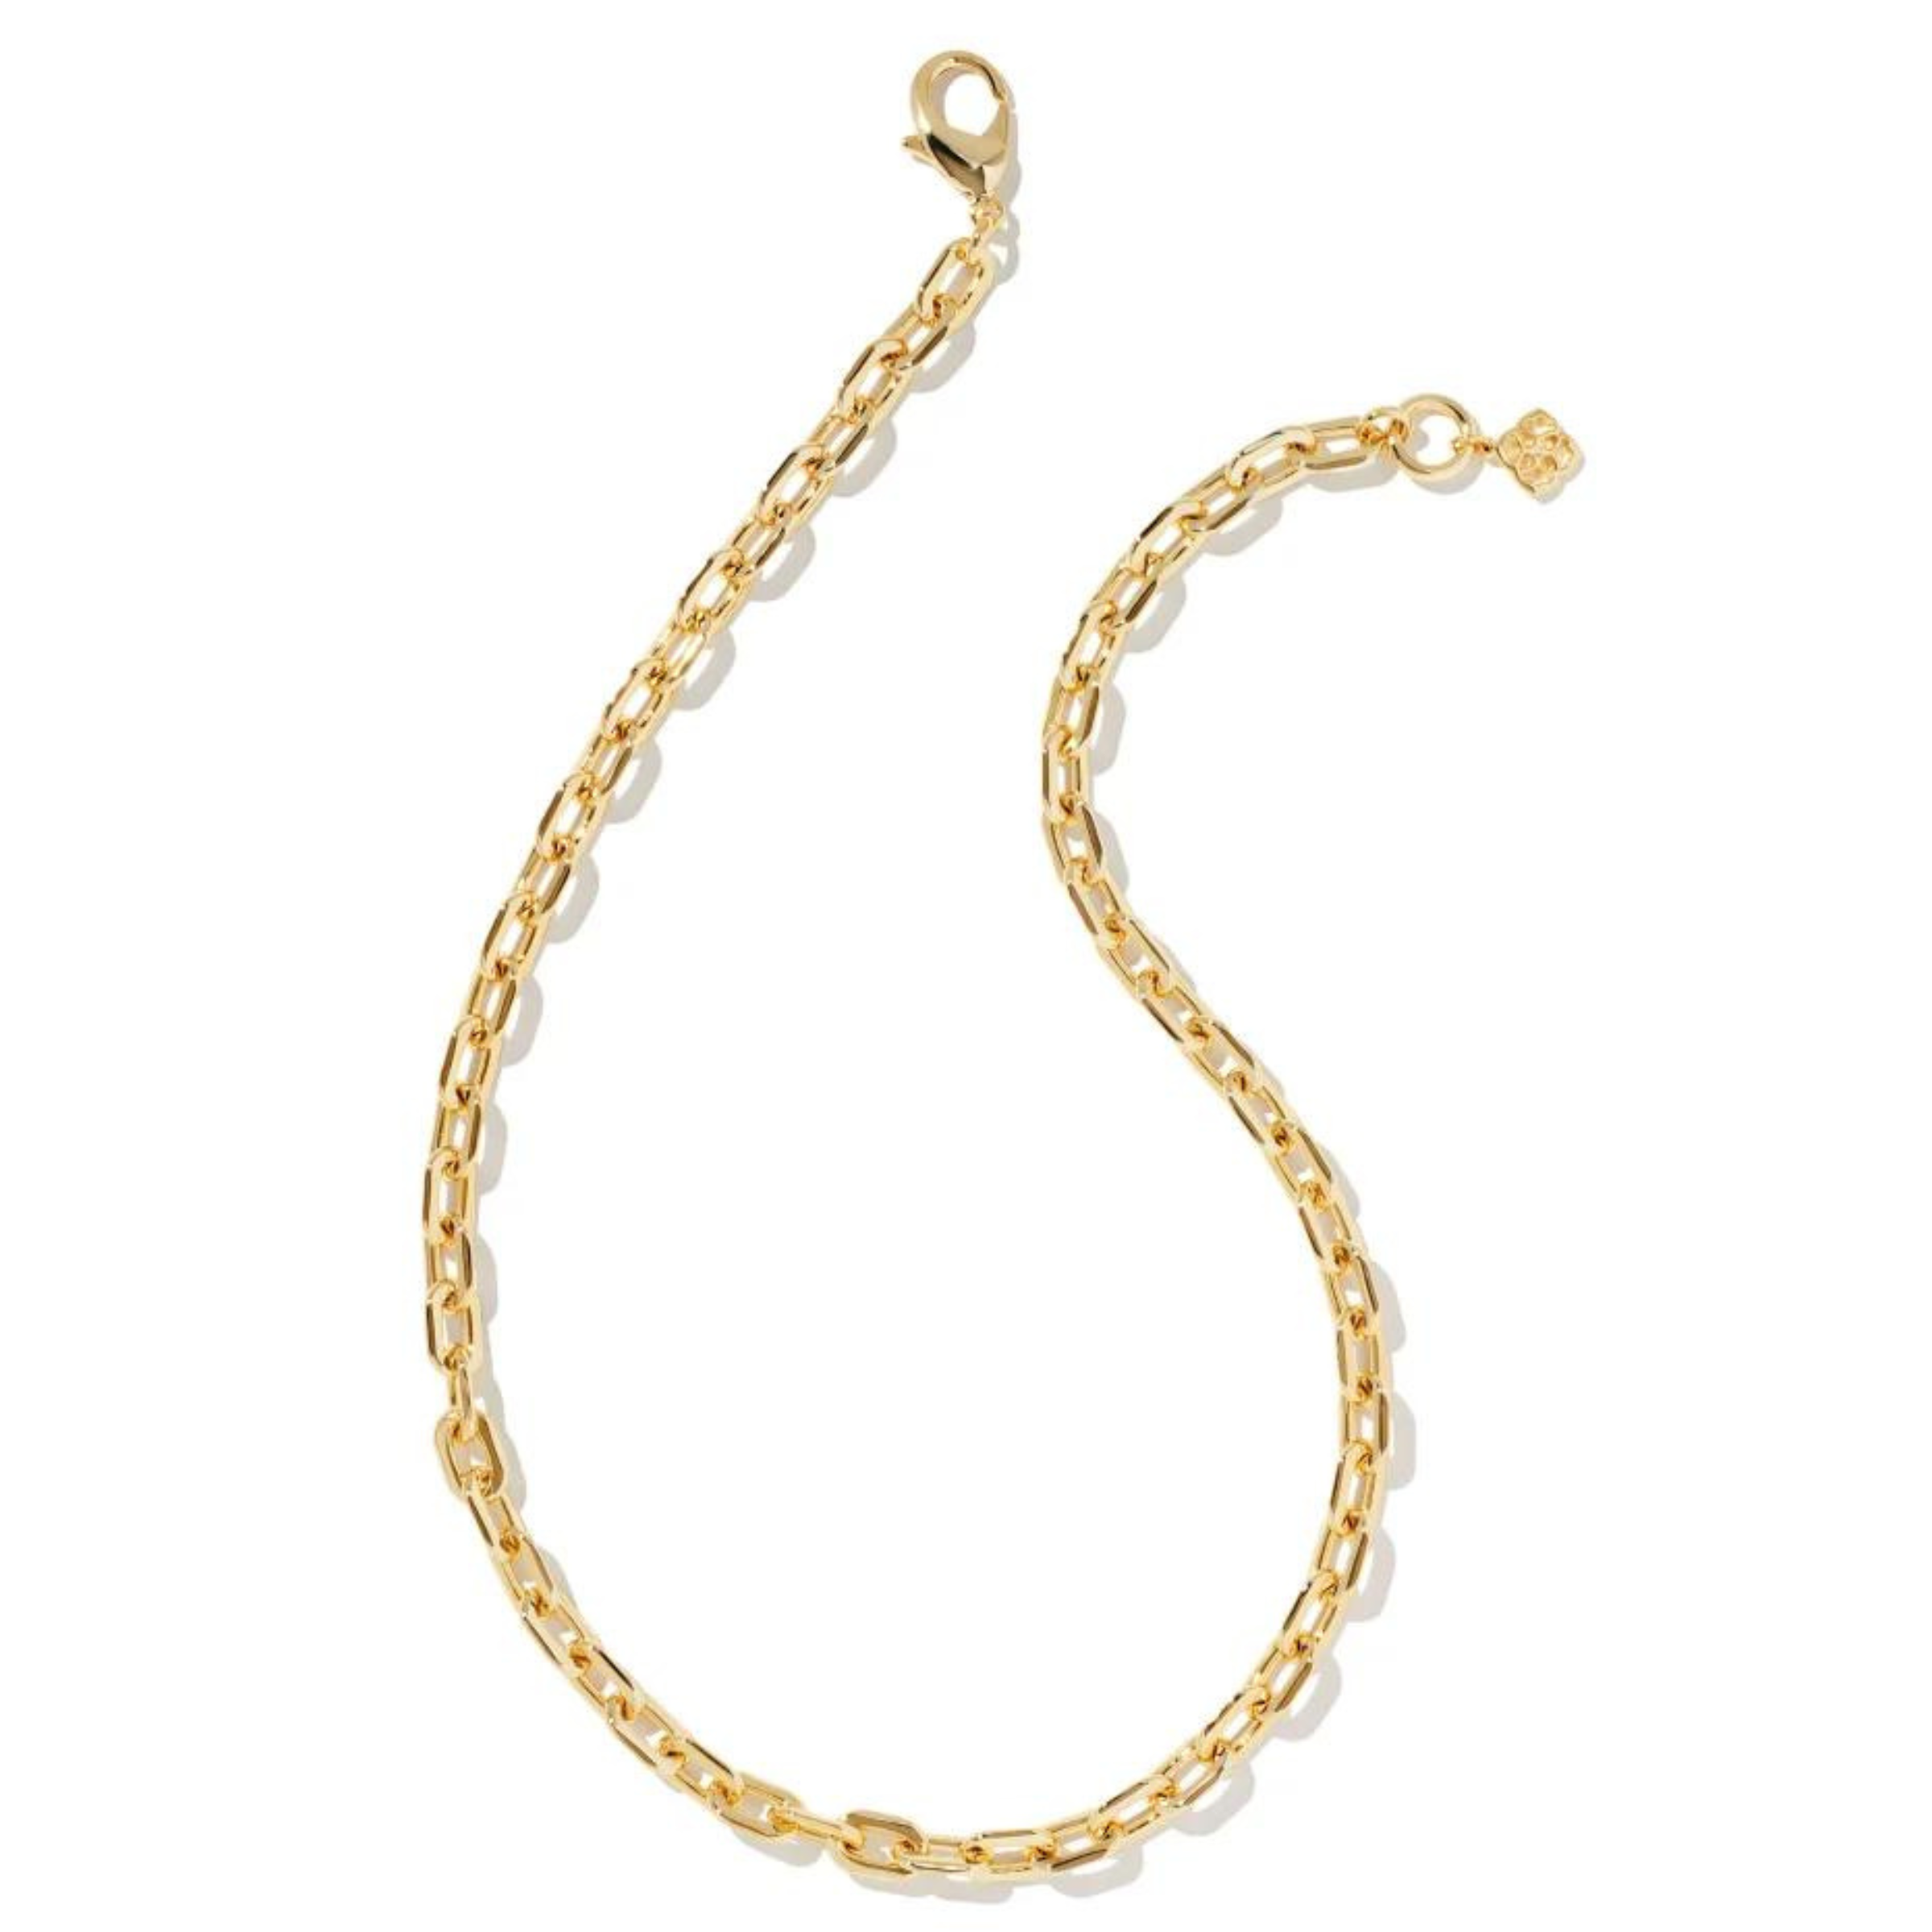 Gold chain necklace pictured on a white background. 